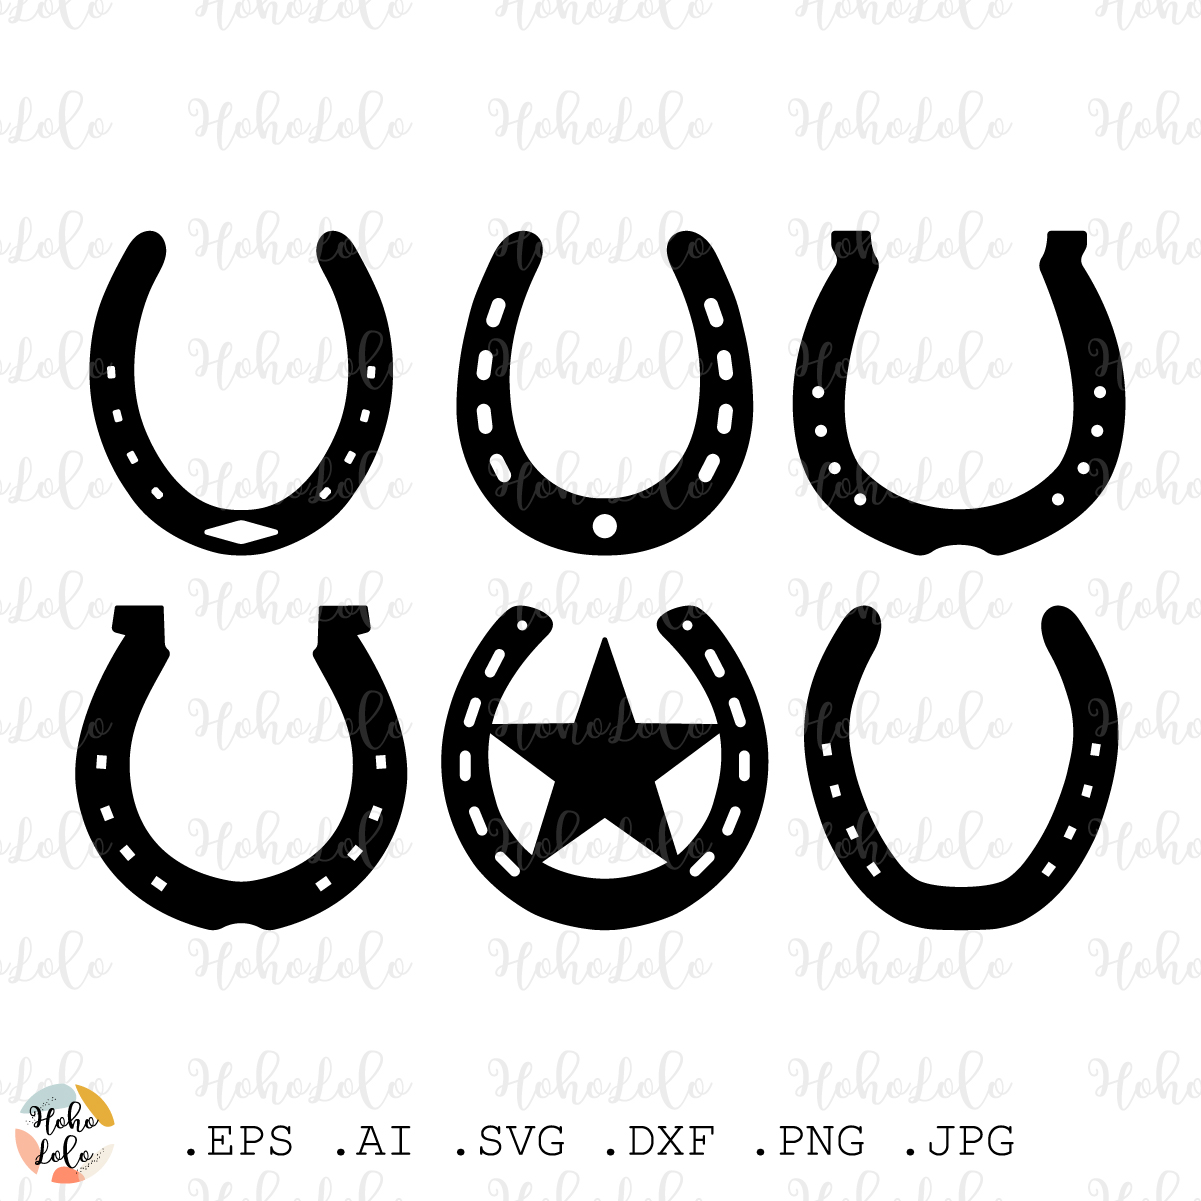 Horse Shoes SVG, PNG, DXF. Instant download files for Cricut Design Space,  Silhouette, Cutting, Printing, or more